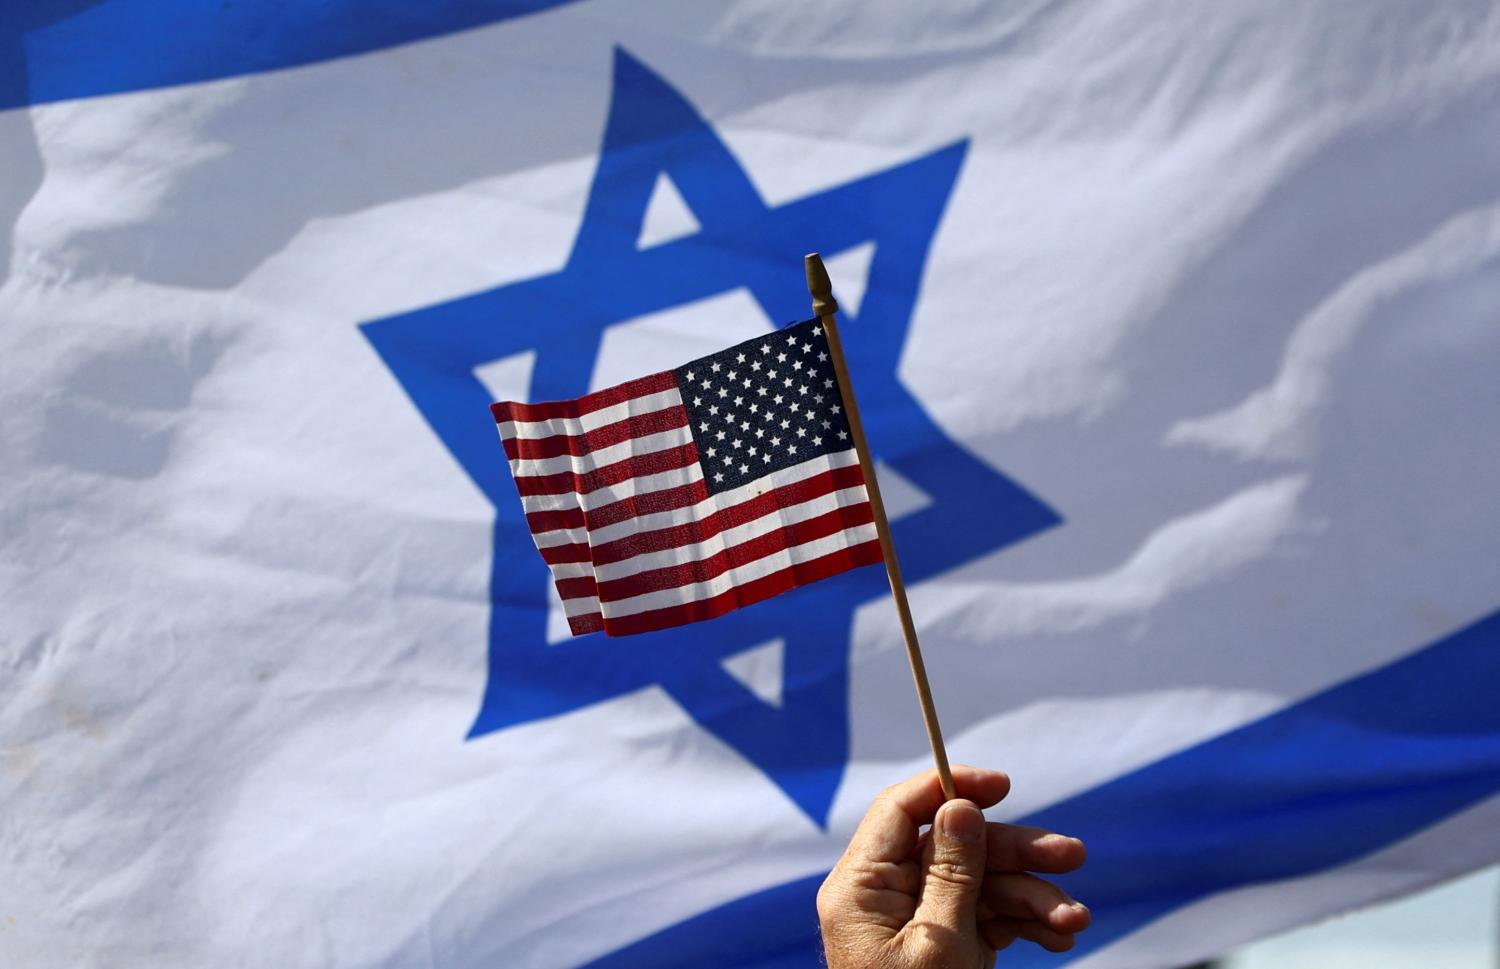 A view of a U.S. flag and an Israeli flag held up by people during a demonstration to show support for U.S. President Joe Biden, for not inviting Israeli Prime Minister Benjamin Netanyahu to the White House, in front of the U.S. Consulate in Tel Aviv, Israel, March 30, 2023. REUTERS/Ronen Zvulun